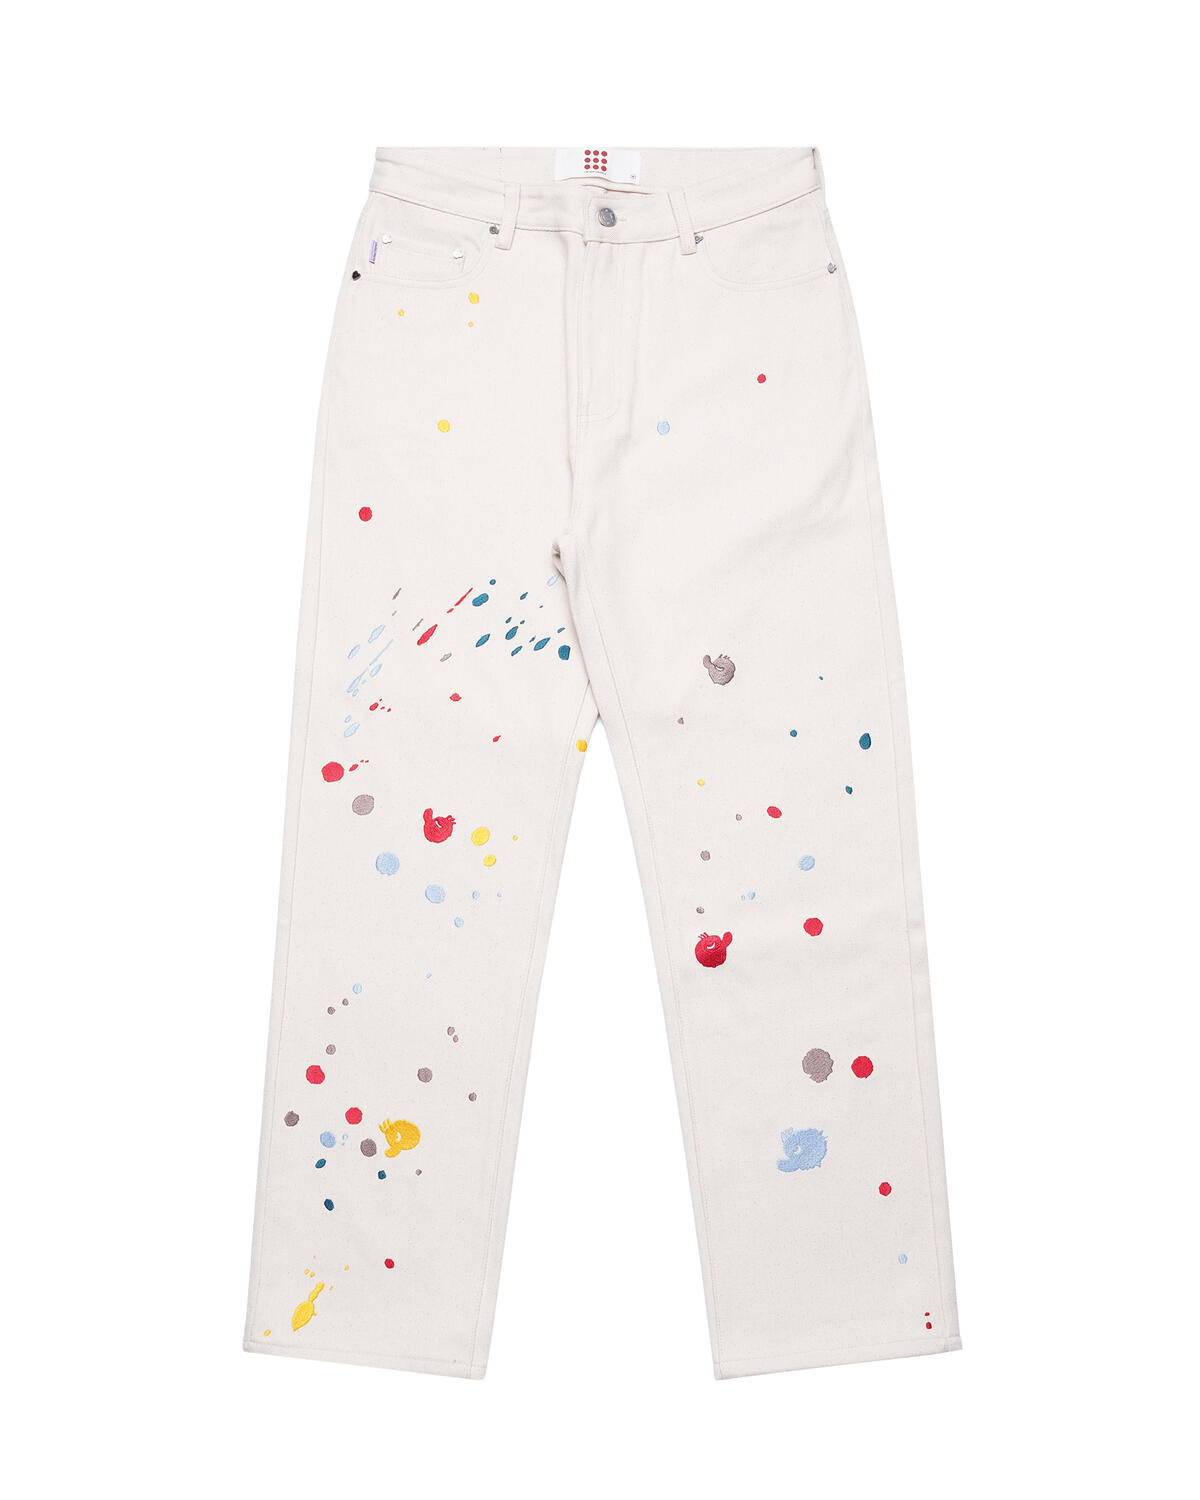 The New Originals Freddy Paint Jeans | 504FRPS24.001 | AFEW STORE